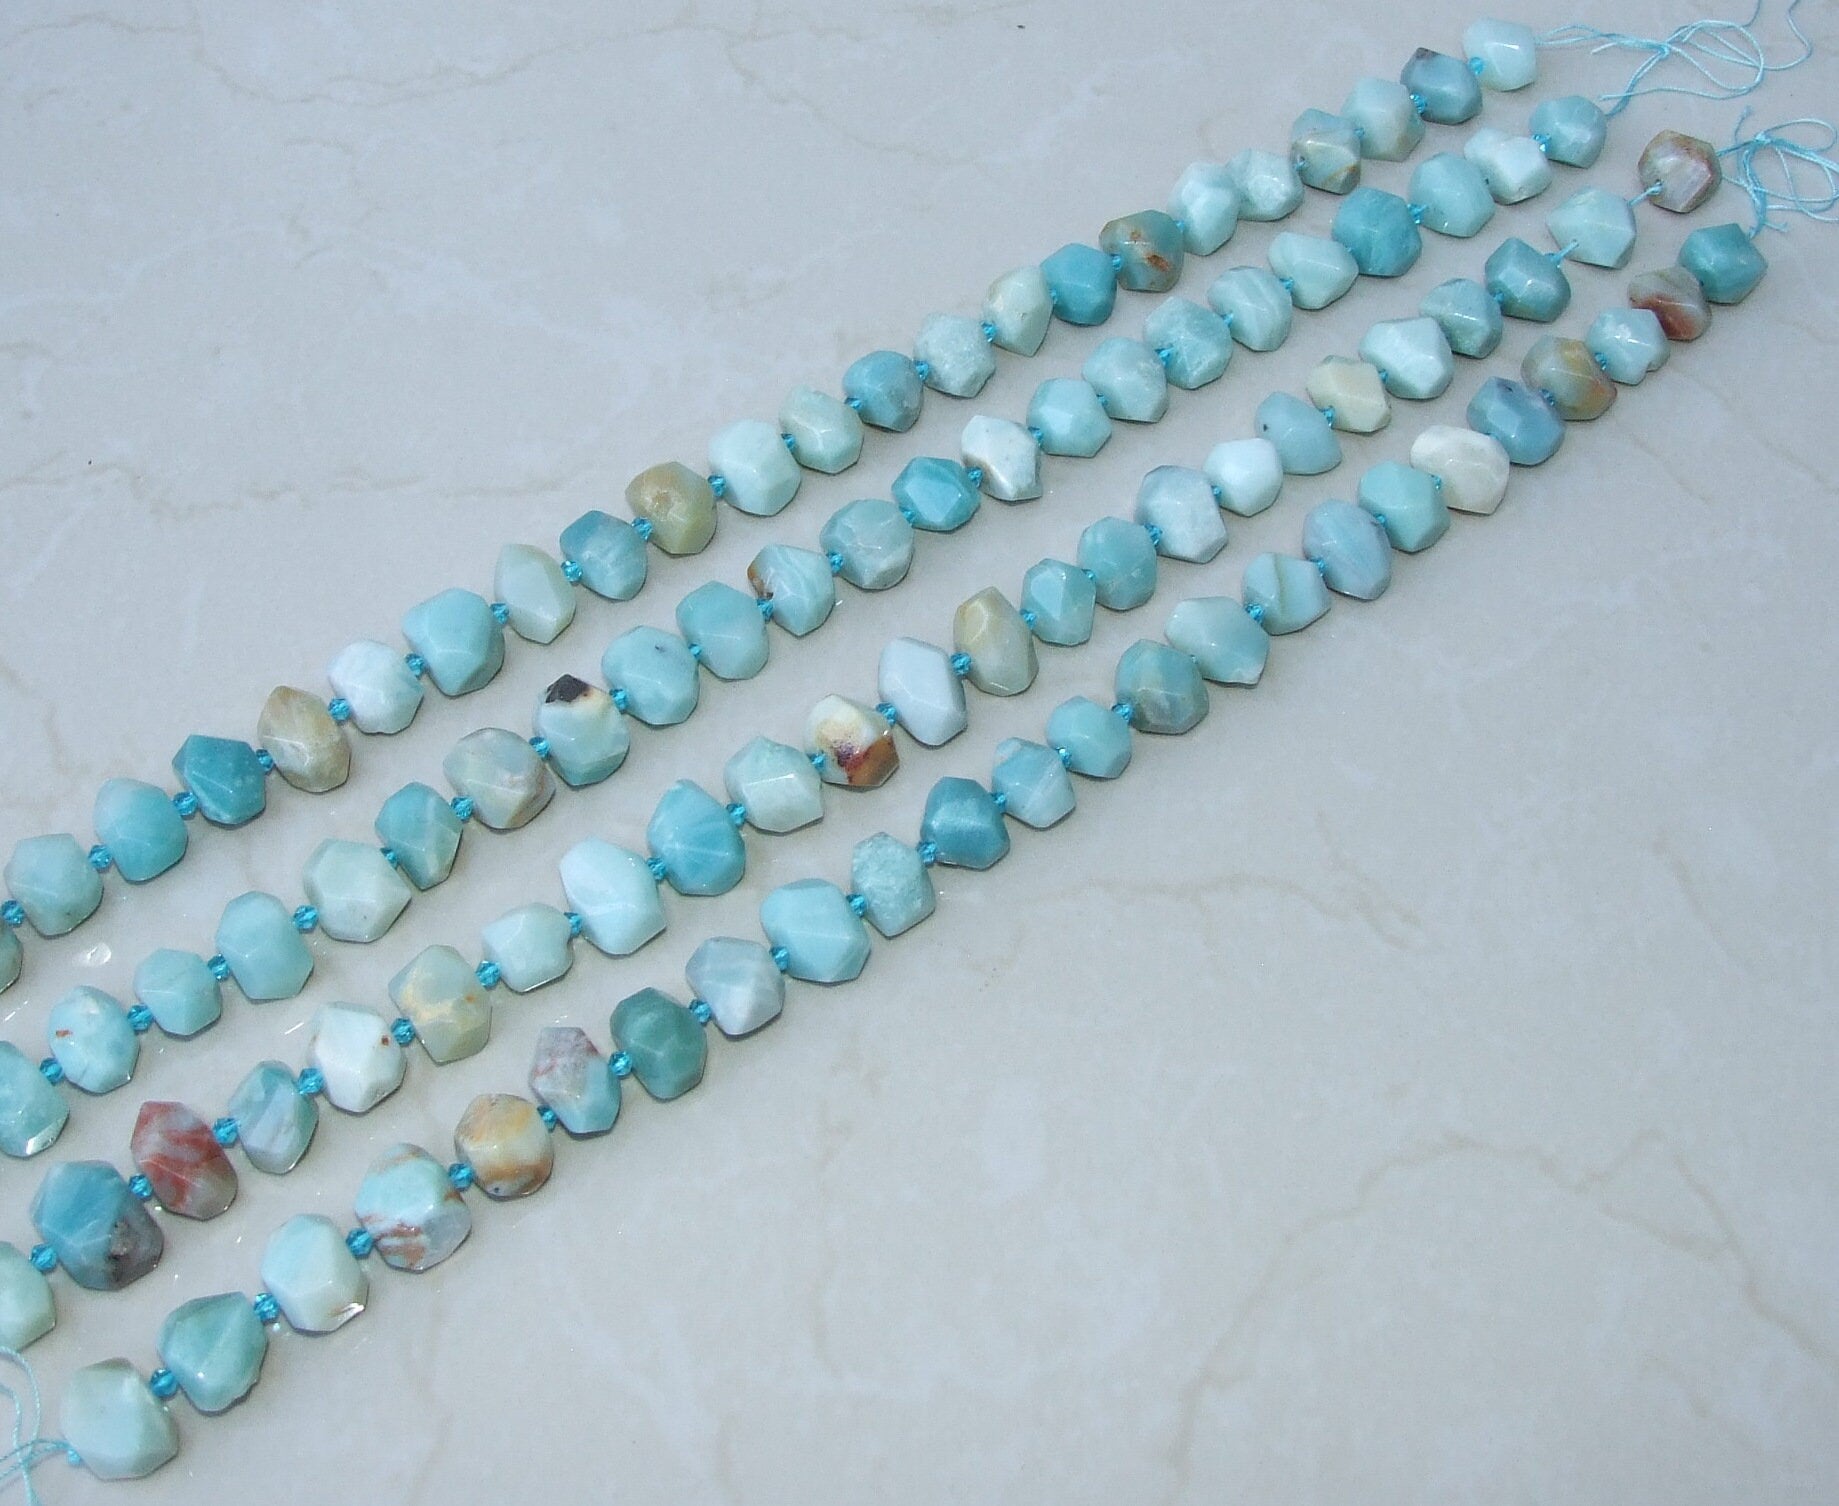 Amazonite Faceted Nugget, Gemstone Beads, Polished Amazonite, Amazonite Bead, Amazonite Pendant, Jewelry Stones, Half Strand - 18mm to 24mm